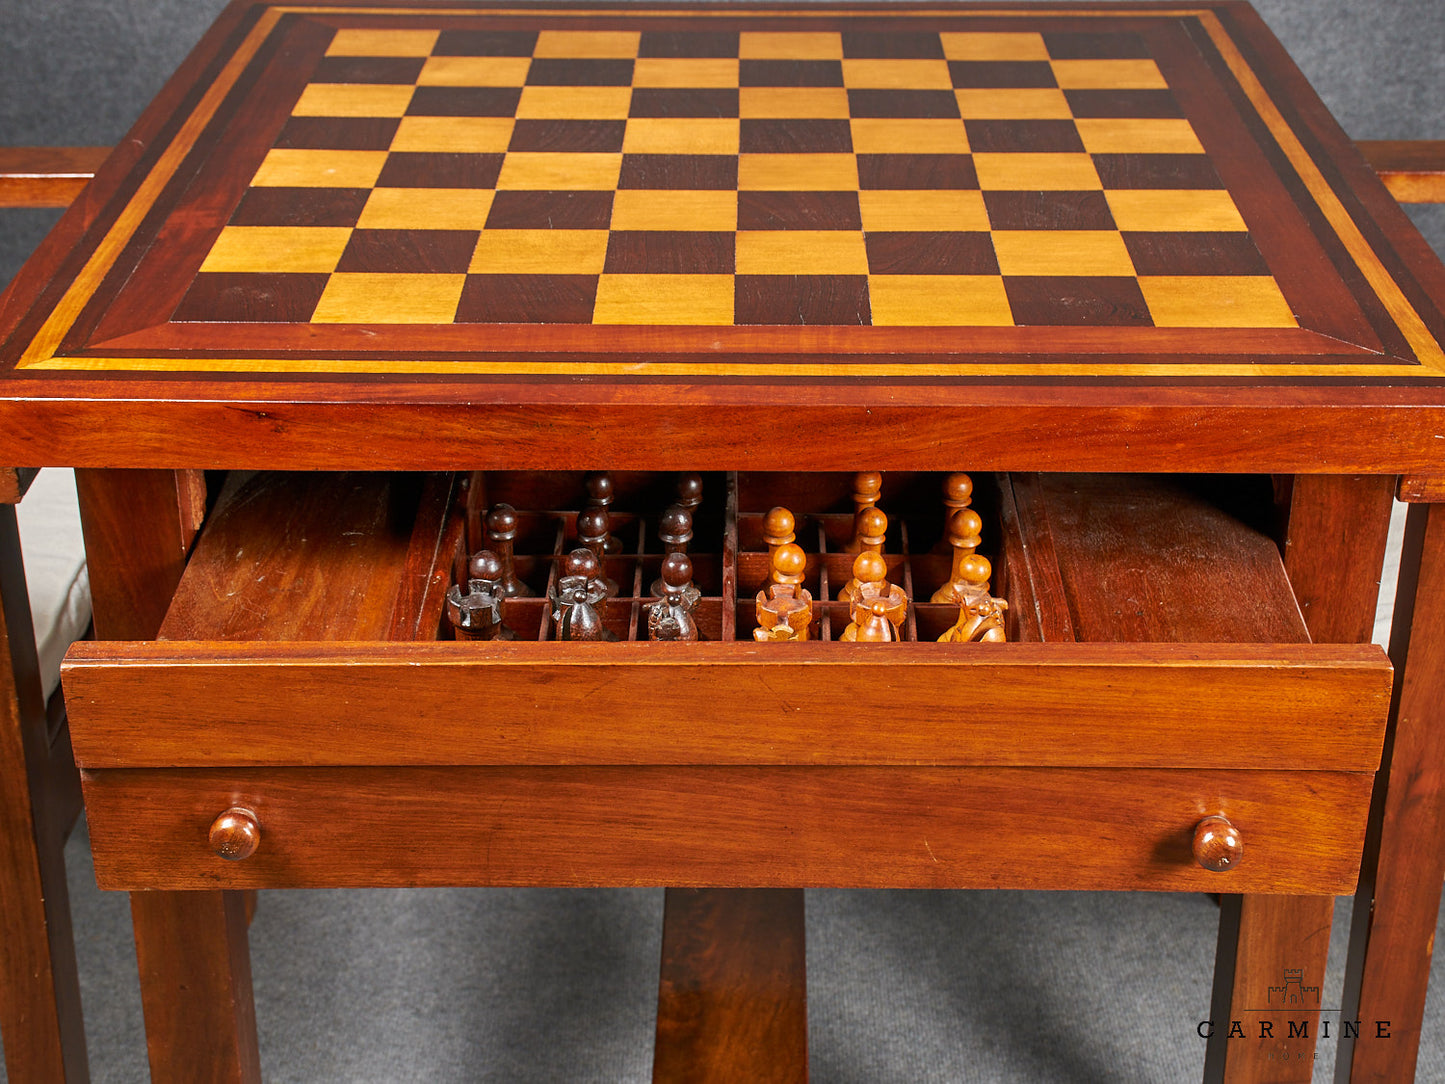 Chess table with 2 chairs